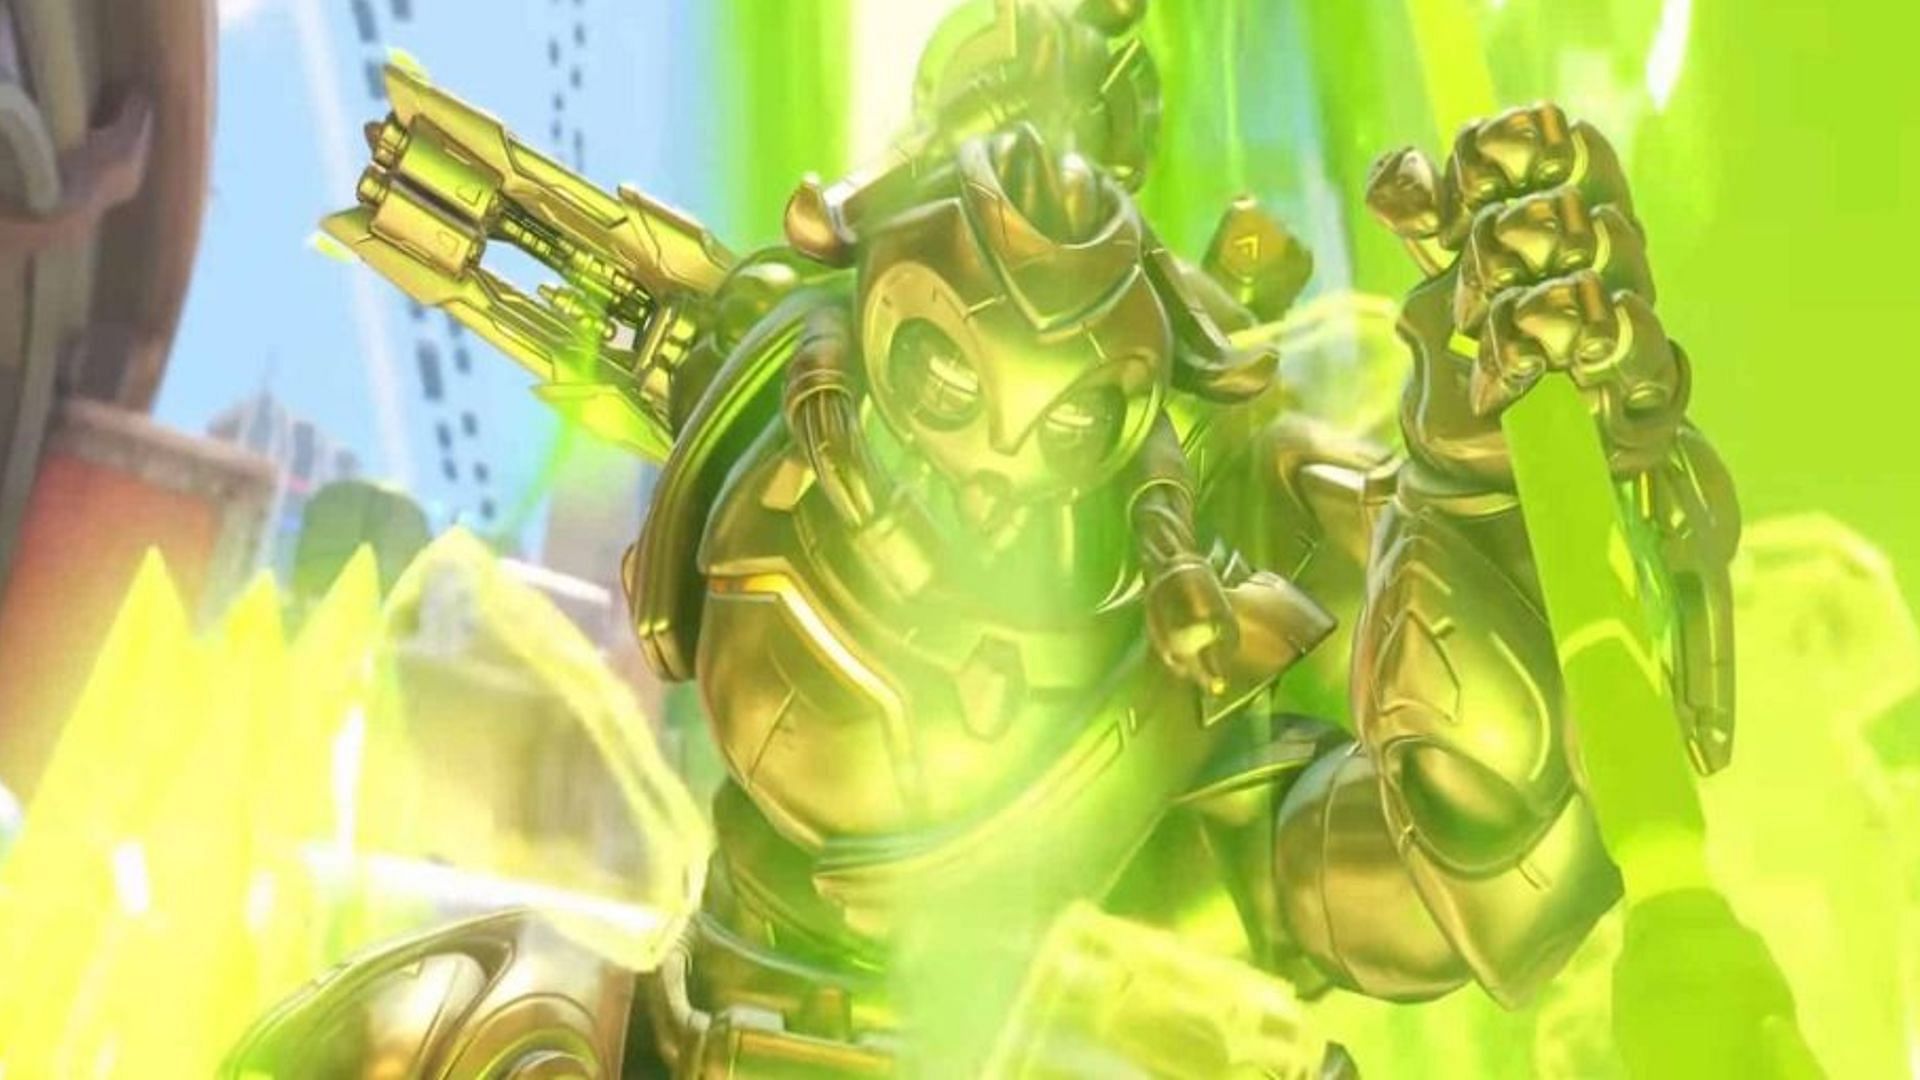 Orisa using her new ultimate in Overwatch 2 (Image via Blizzard)